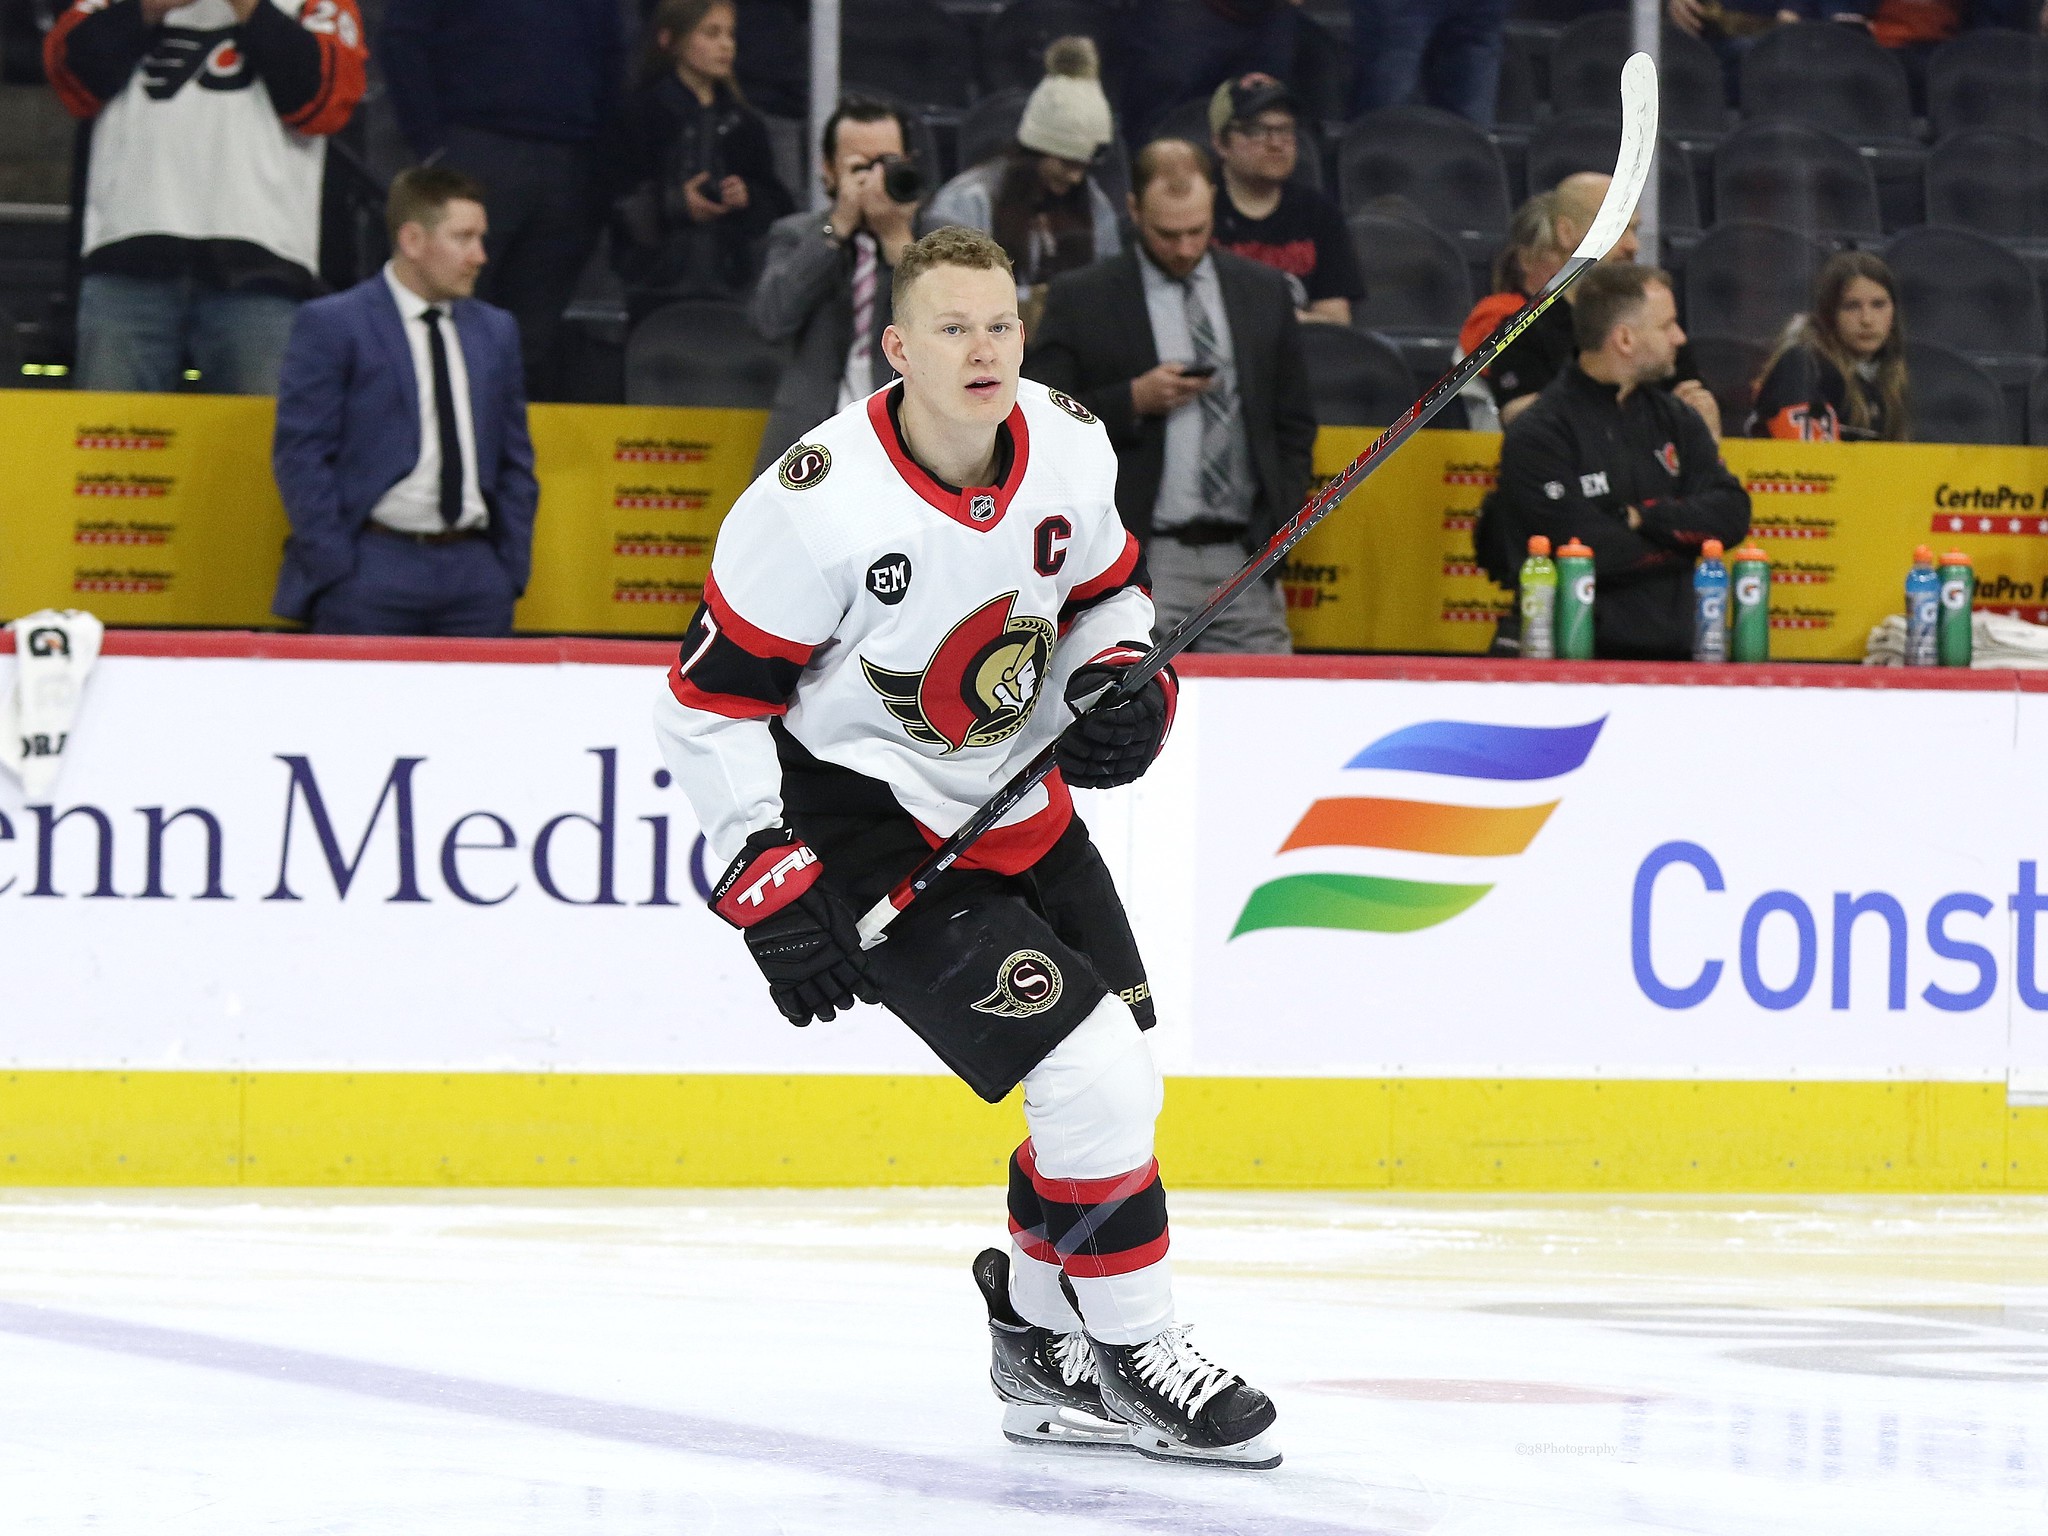 What's Brady Tkachuk's value? Could he be the target of an offer